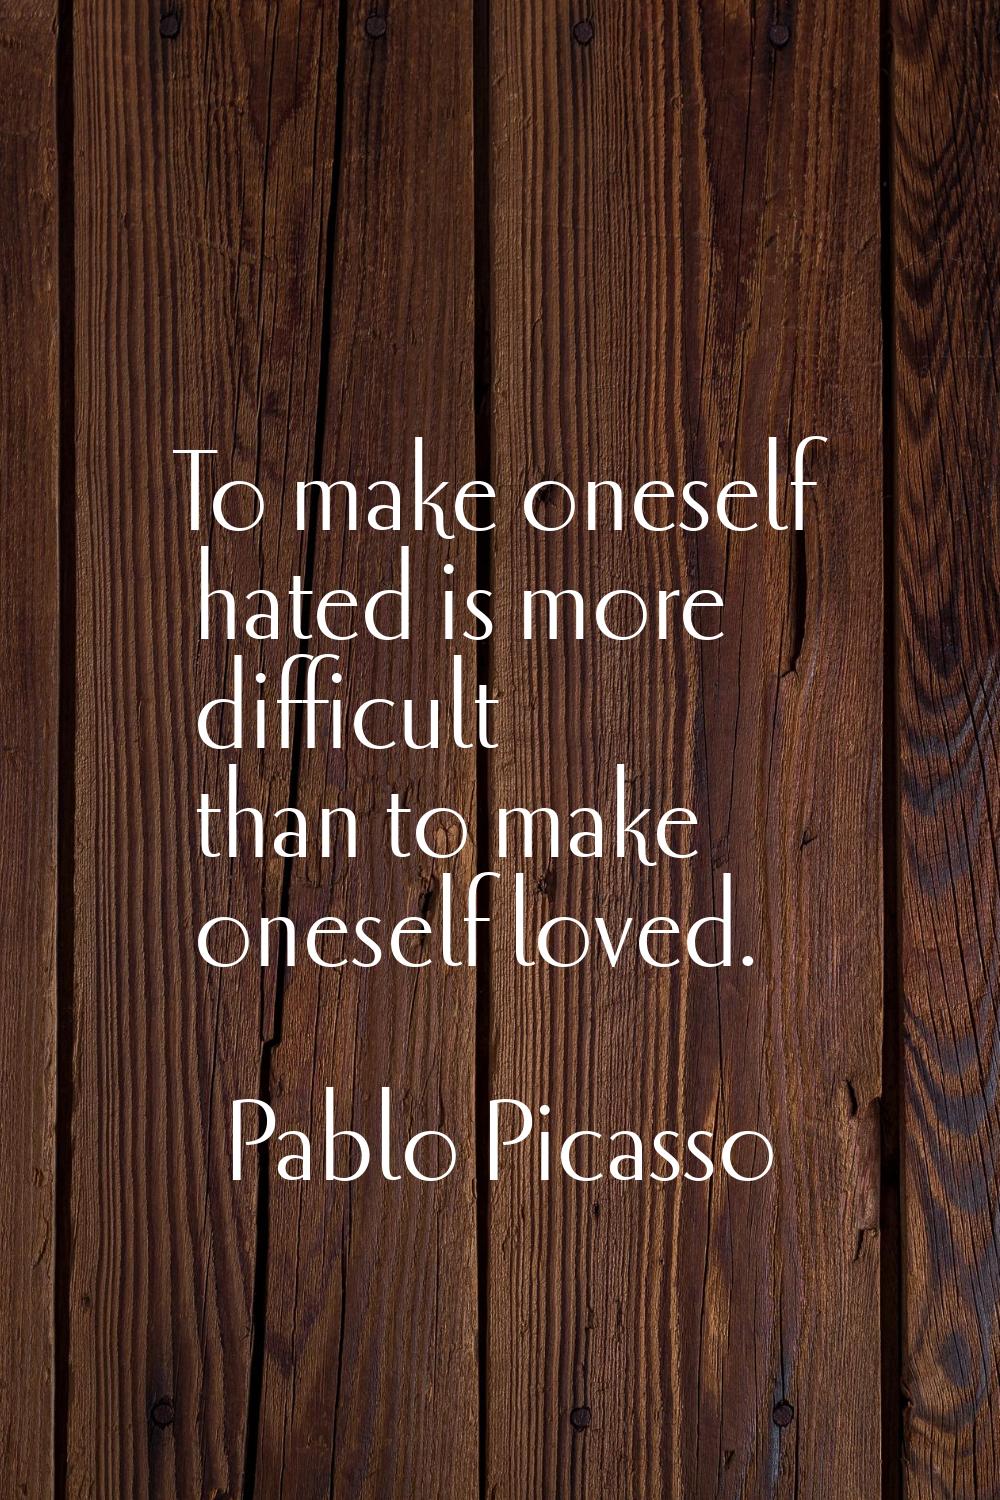 To make oneself hated is more difficult than to make oneself loved.